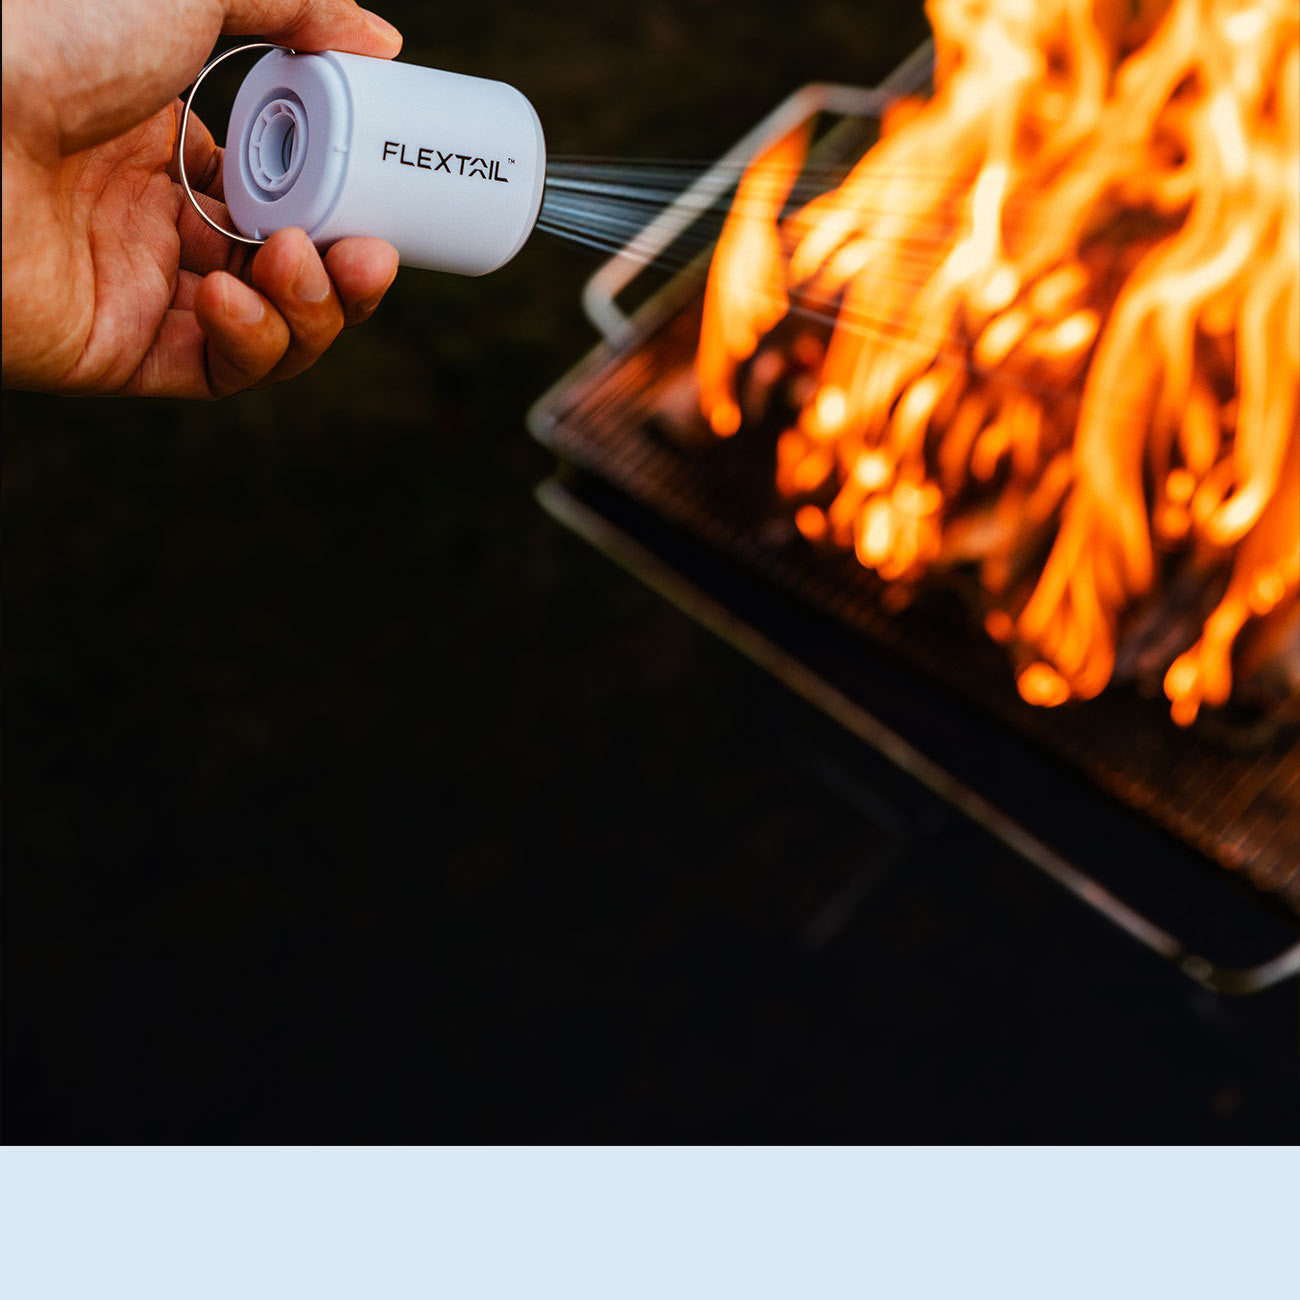 Outdoor Portable Mini Camping USB Inflator - MBKLuxe